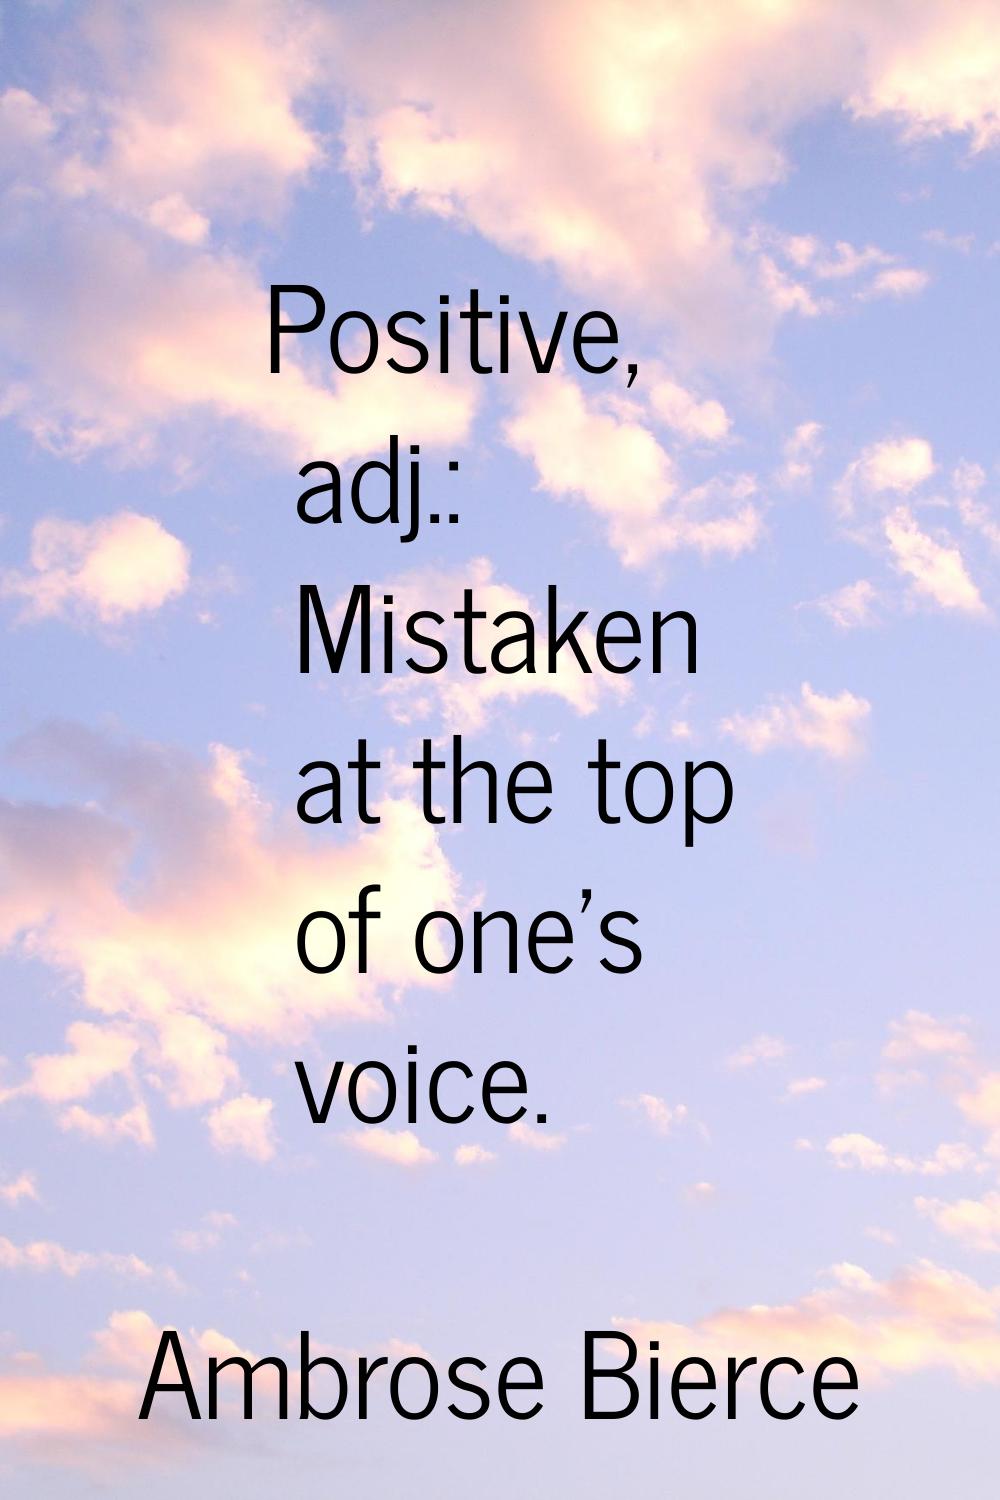 Positive, adj.: Mistaken at the top of one's voice.